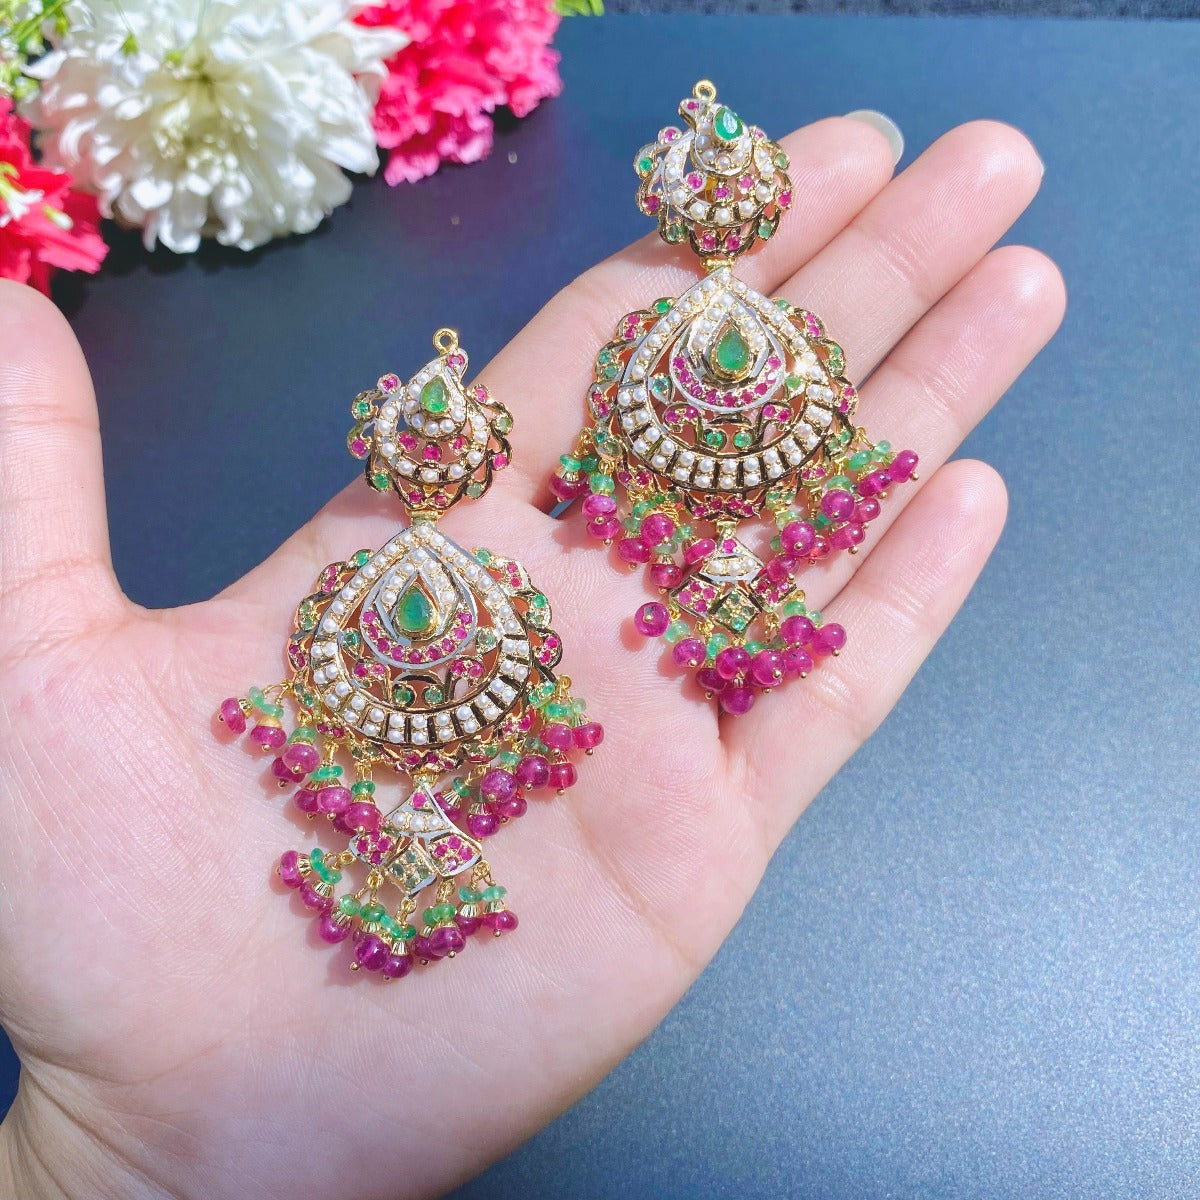 gold  earrings matching the rajasthani necklace with ruby emerald and pearls